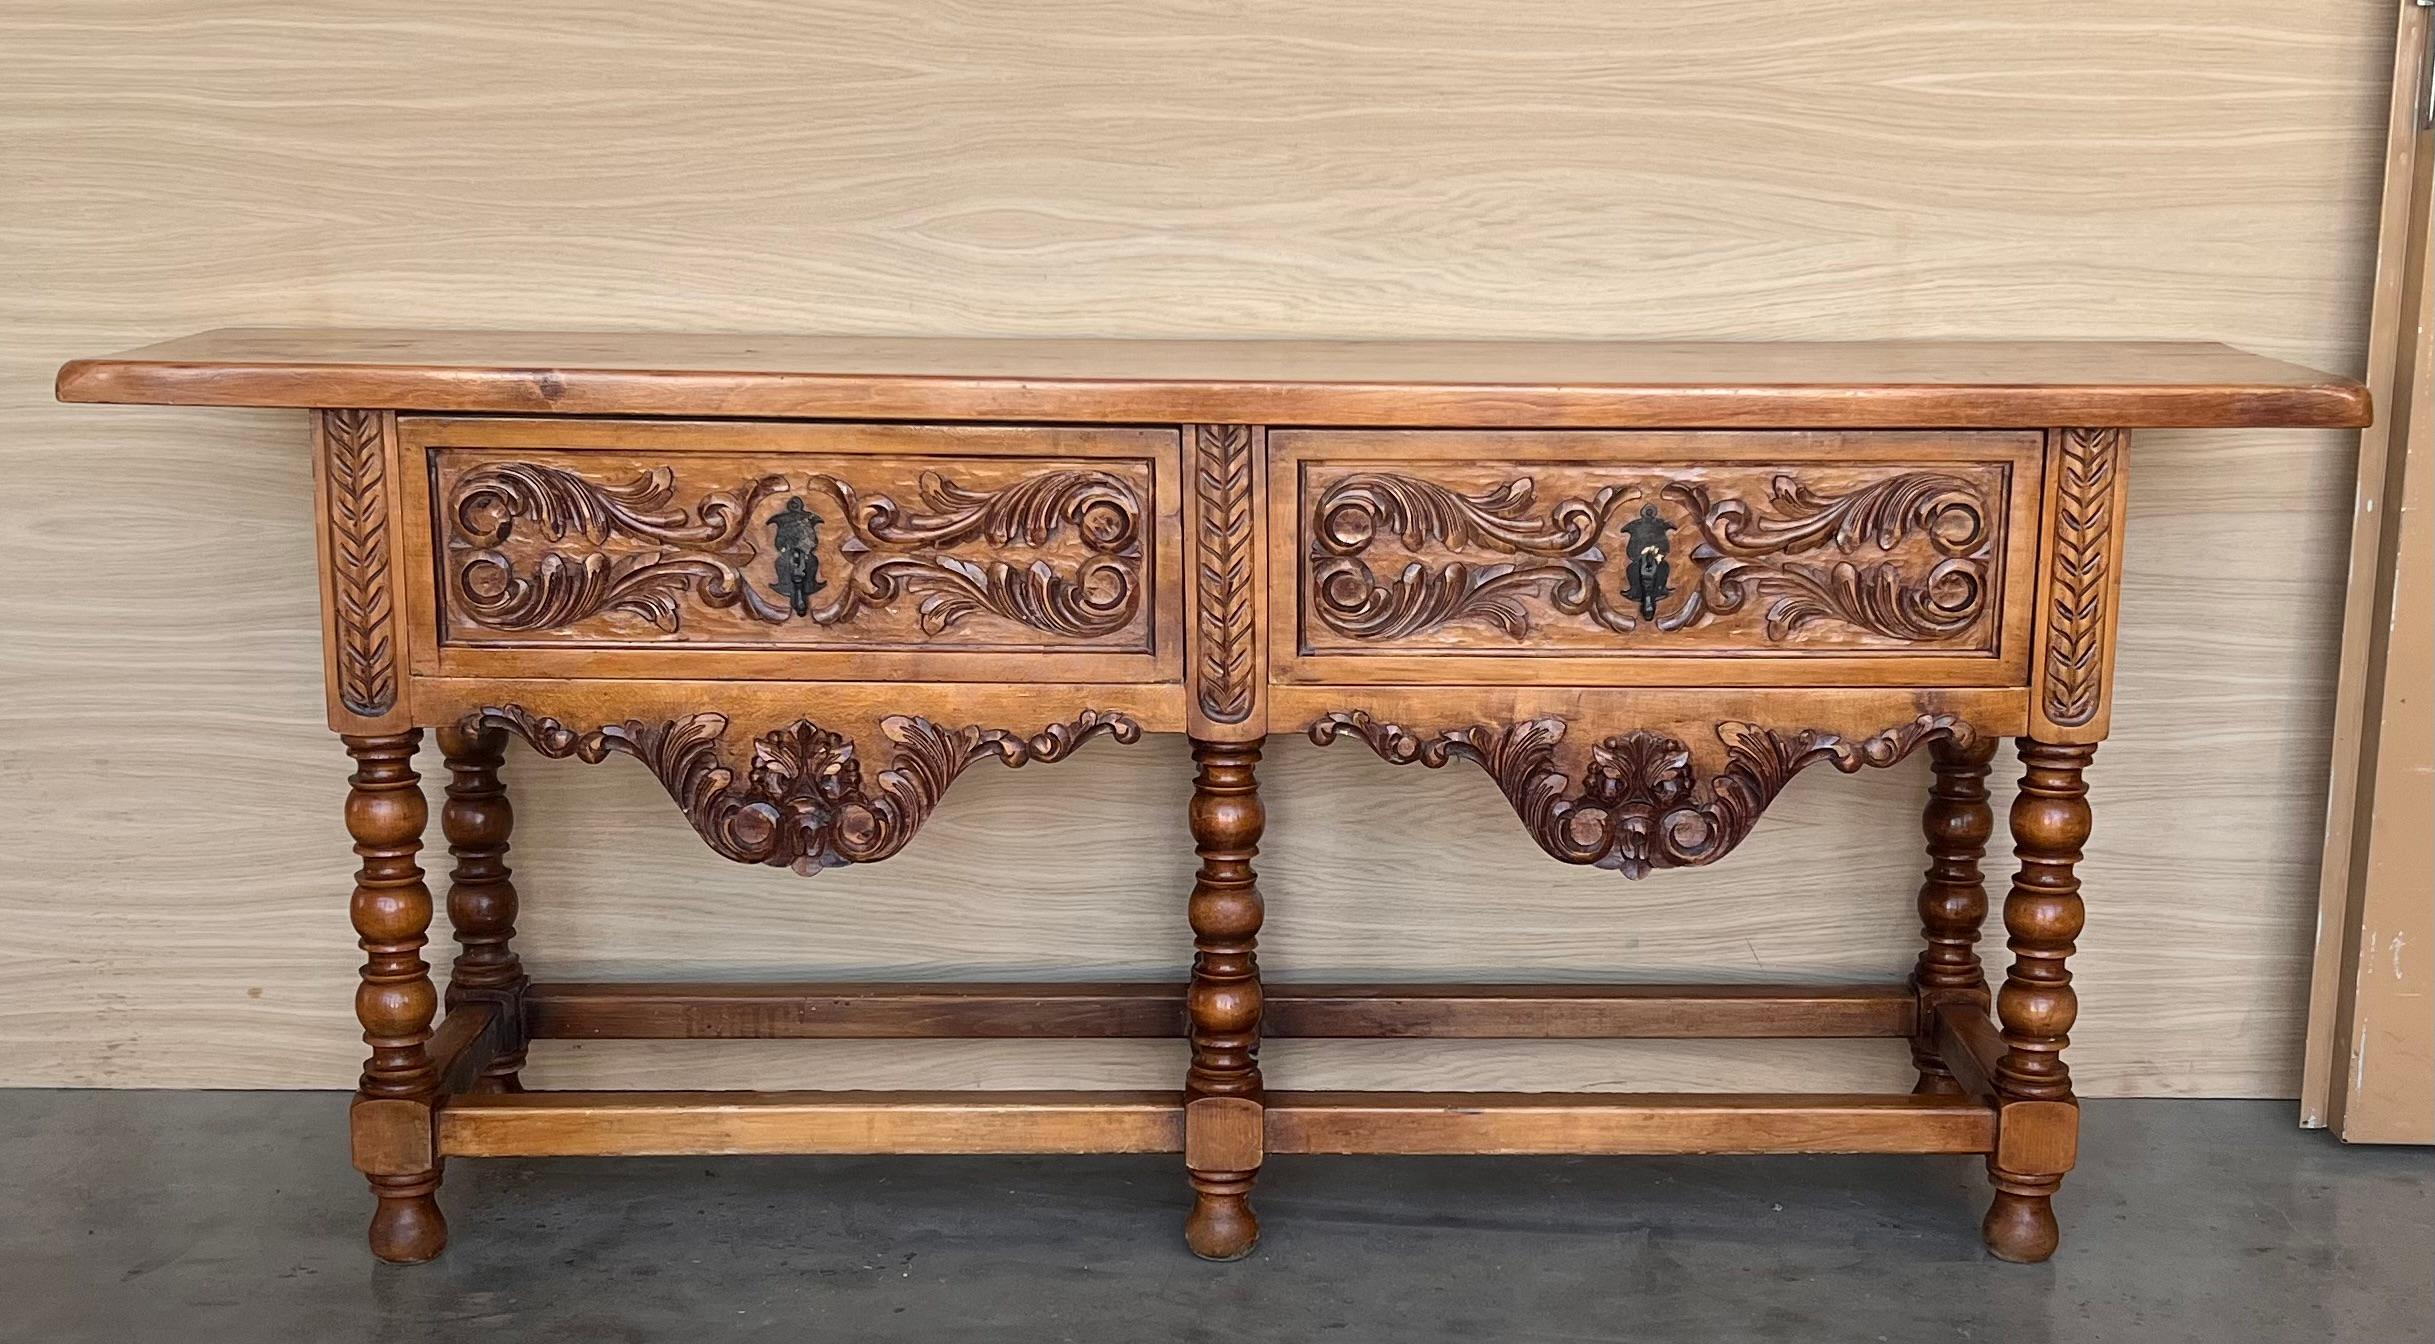 Console table made of carved walnut with turned legs and heavy top. 
